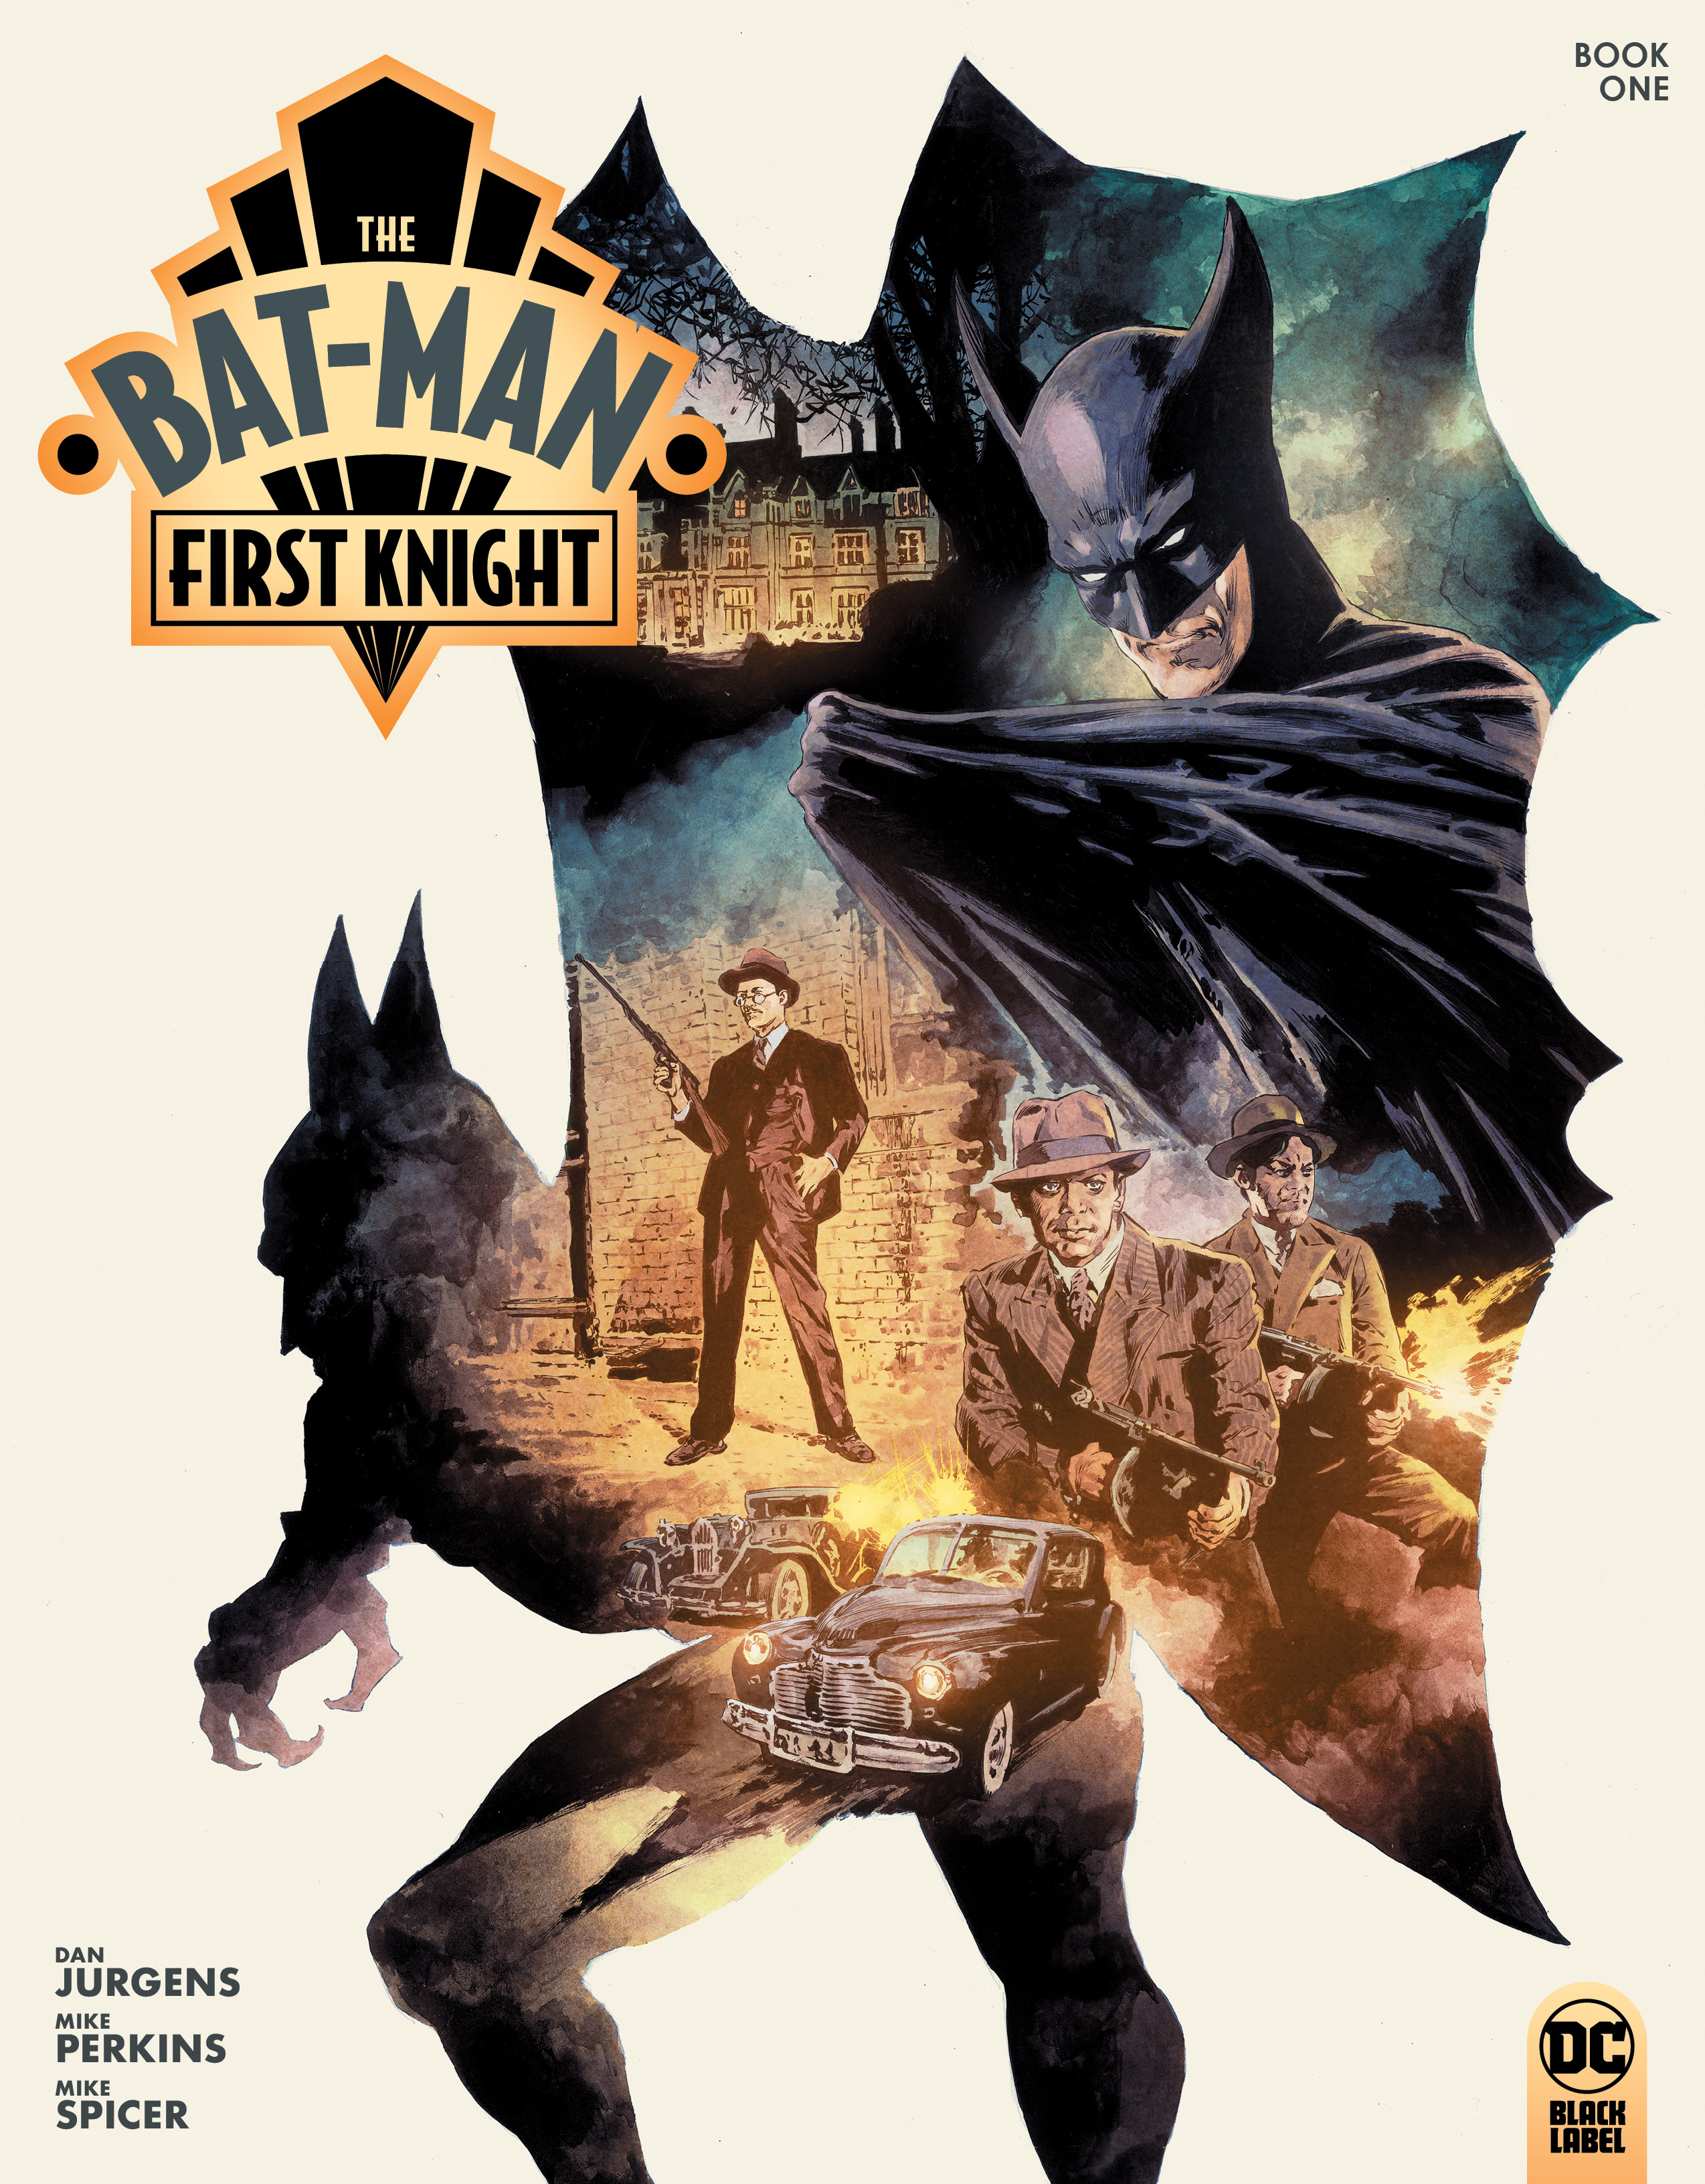 The Bat-Man First Knight #1 Cover A Mike Perkins (Mature) (Of 3)